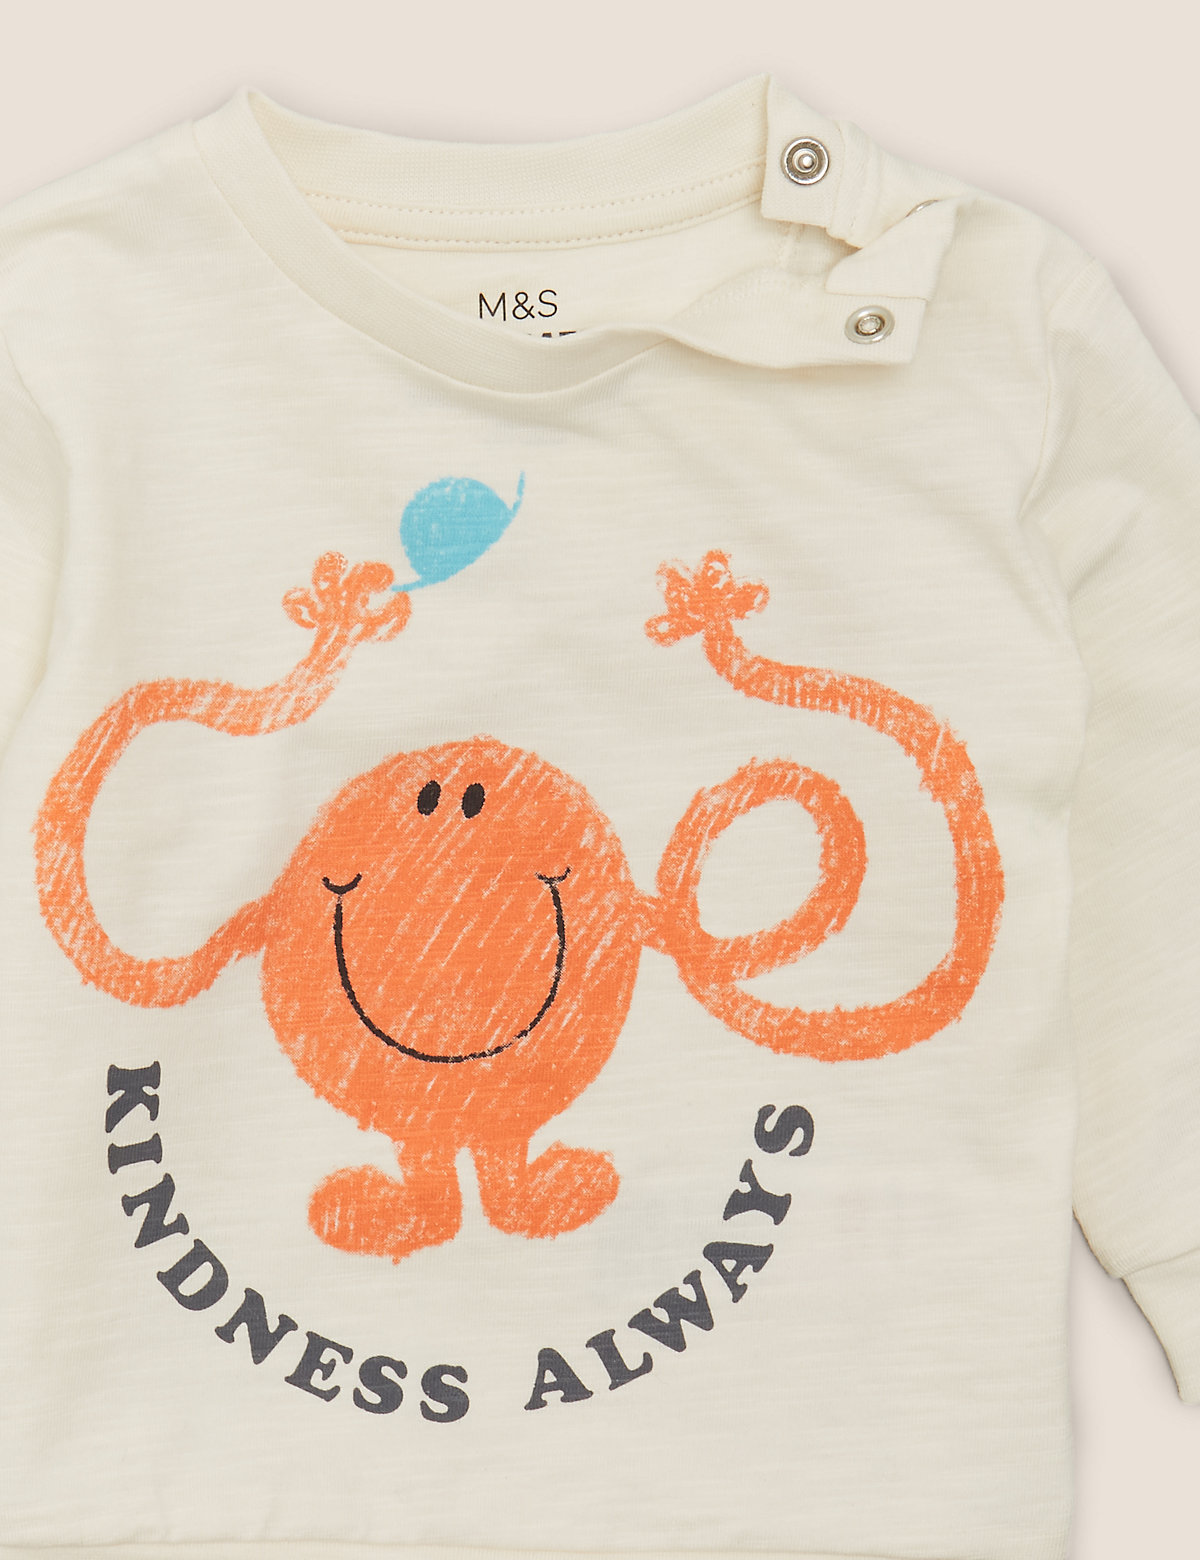 2 Piece Pure Cotton Mr Men™ Outfit (7lbs-3 Yrs)